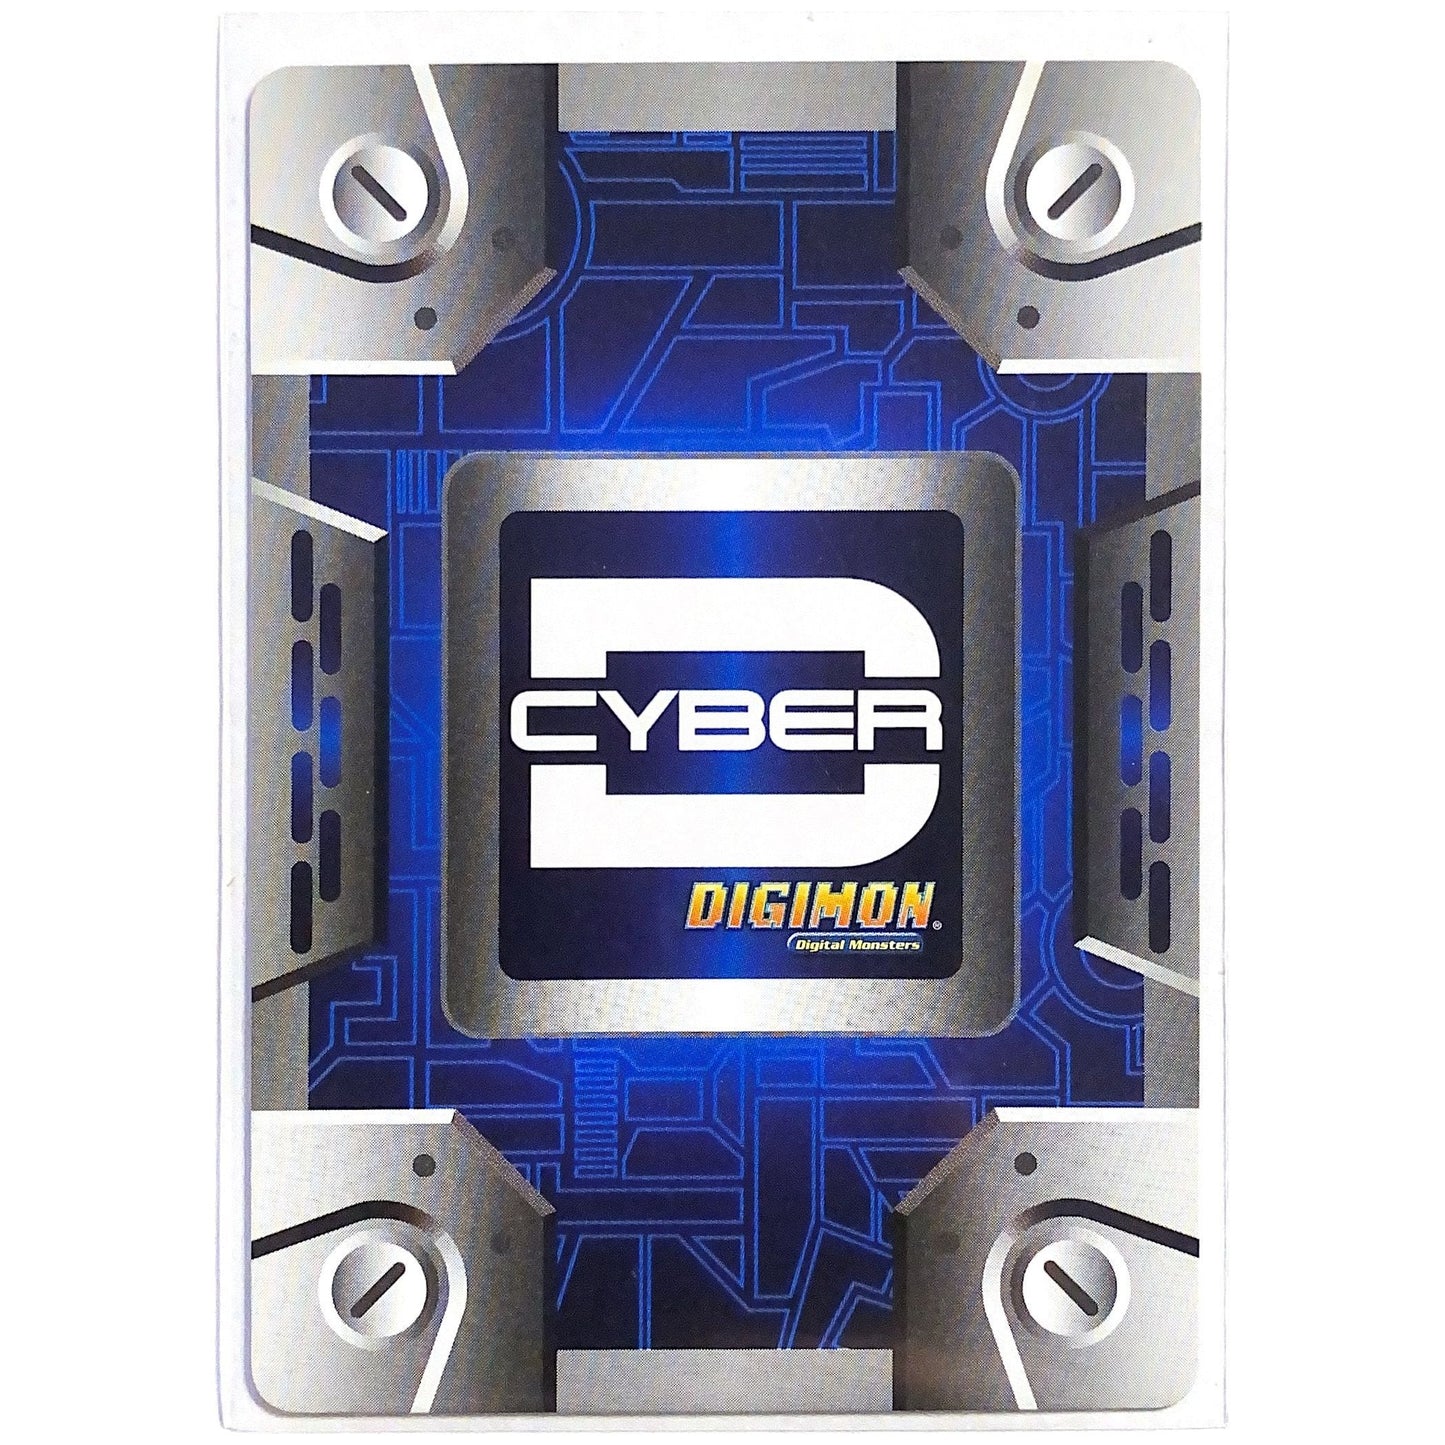  2004 D-Cyber Digimon Digivice Greymon DC-024  Local Legends Cards & Collectibles